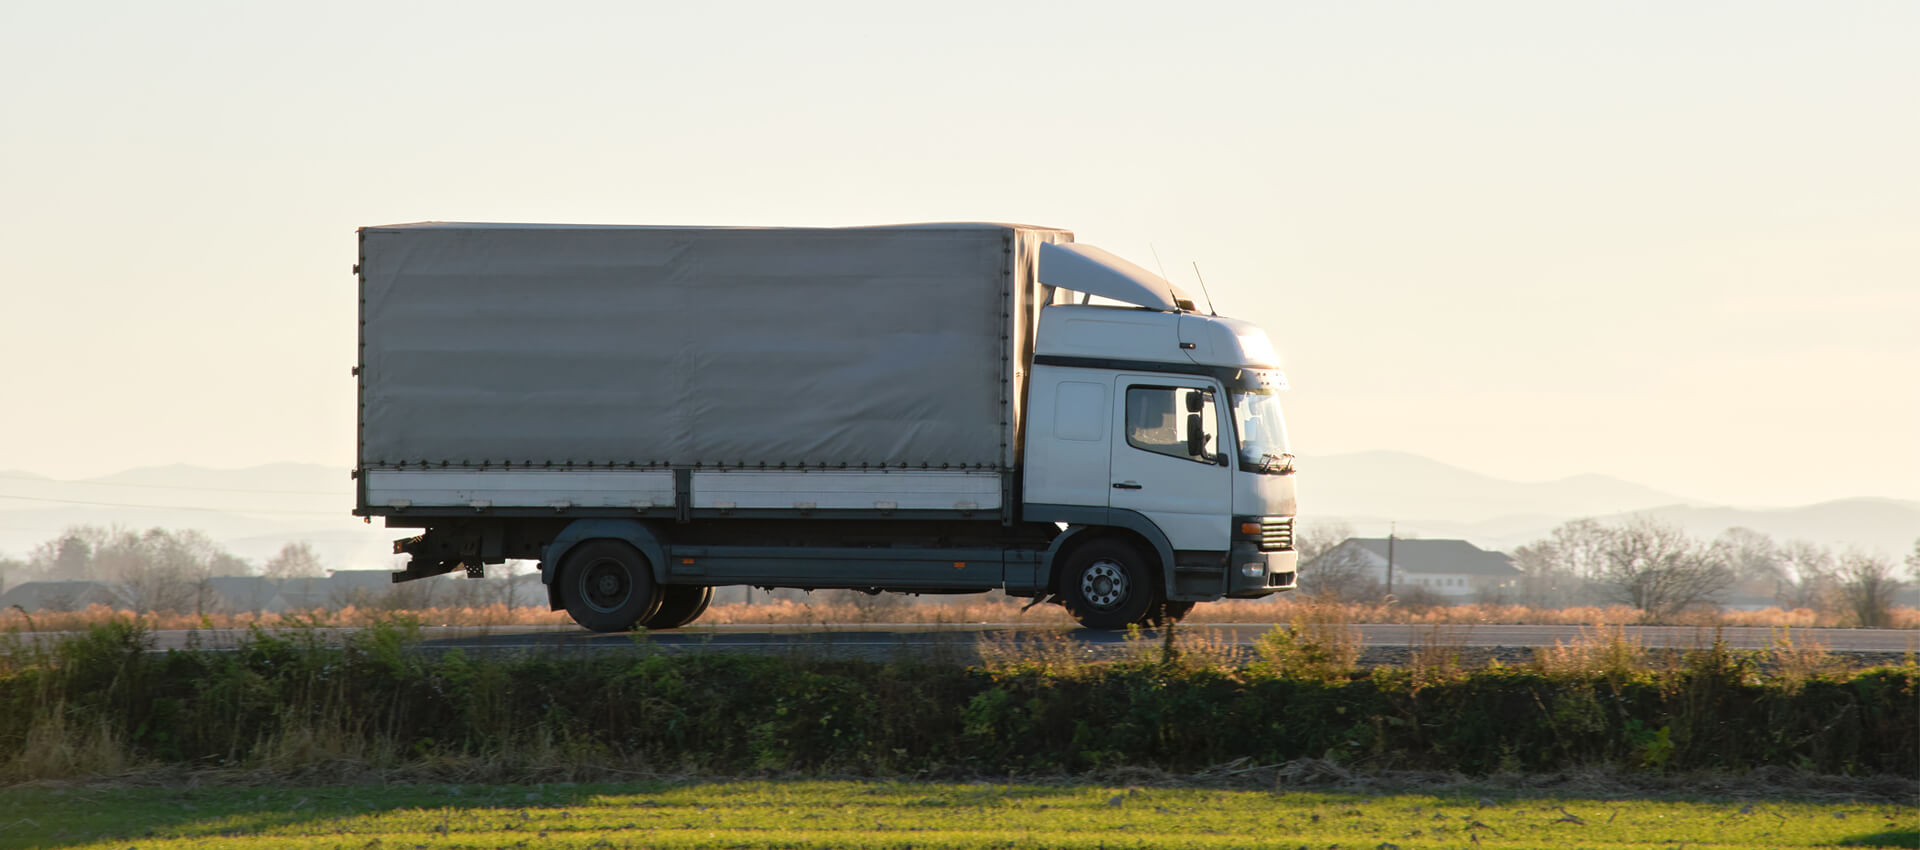 Mastering the Road: The Art and Science of Truck Driving with Logisticize